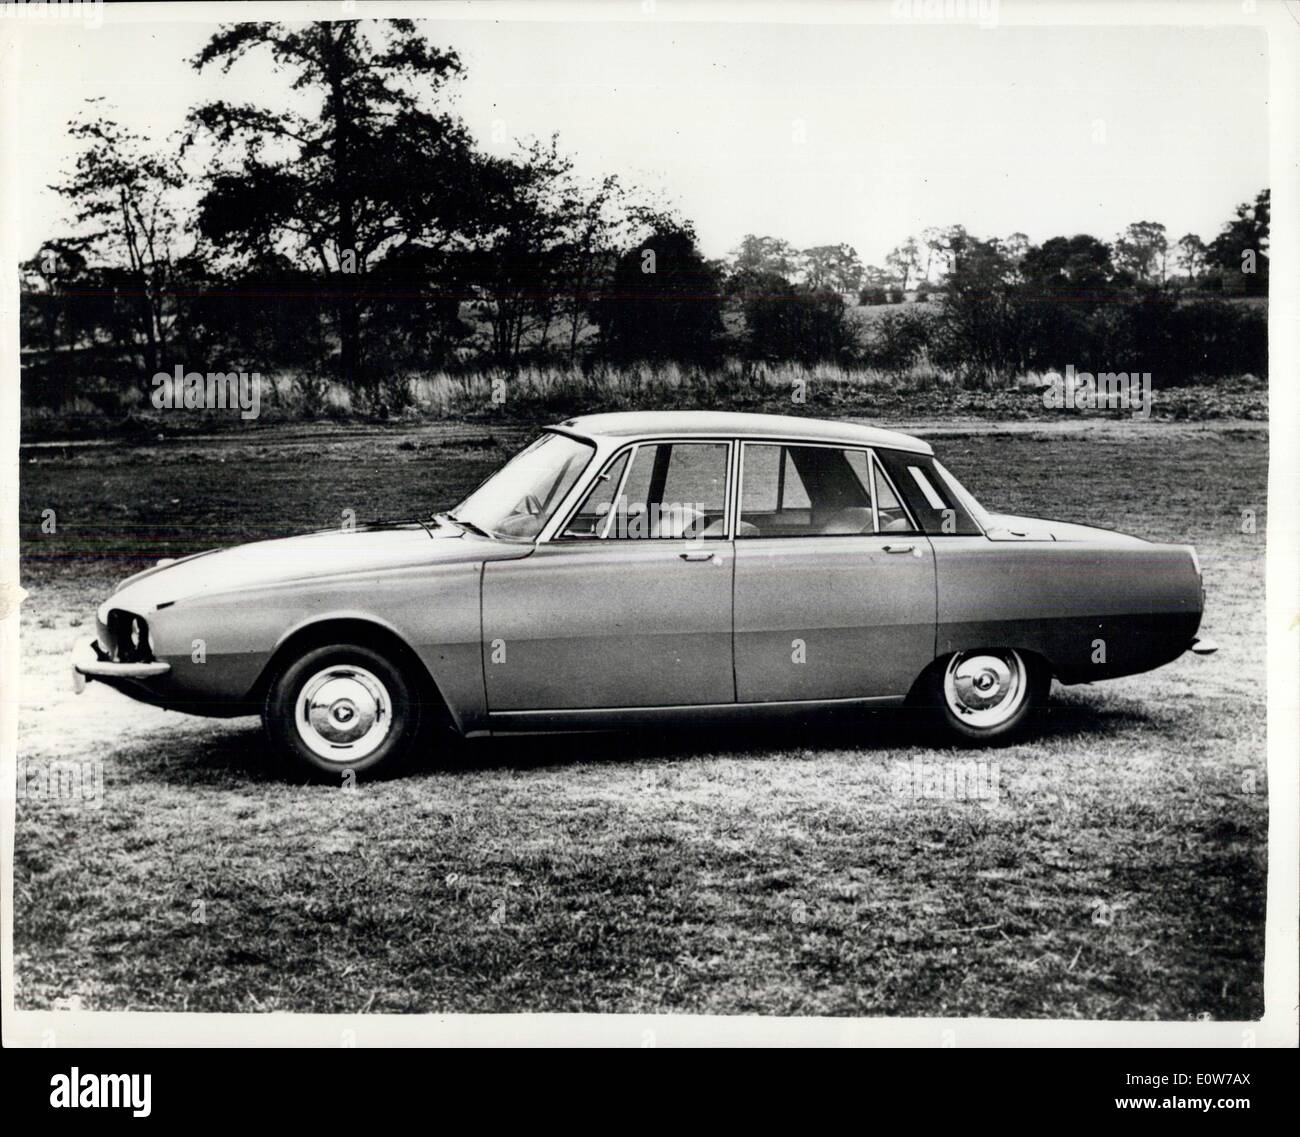 Oct. 13, 1961 - The New Rover T4 Gas Turbine Car..140 Brake Horse Power Enginee--The New T4 Gas Turbine Car of the Rover Company - has been announced. It is desoribed as ''the first prototype desigend with the possibility of future production in mind'' - but the prototype will not be on show at the Earls Court Motor Shownext week - and it will not be demonstrated to the press until next - Spring..The engine production the equivalent of 140 brake horse power. Stock Photo